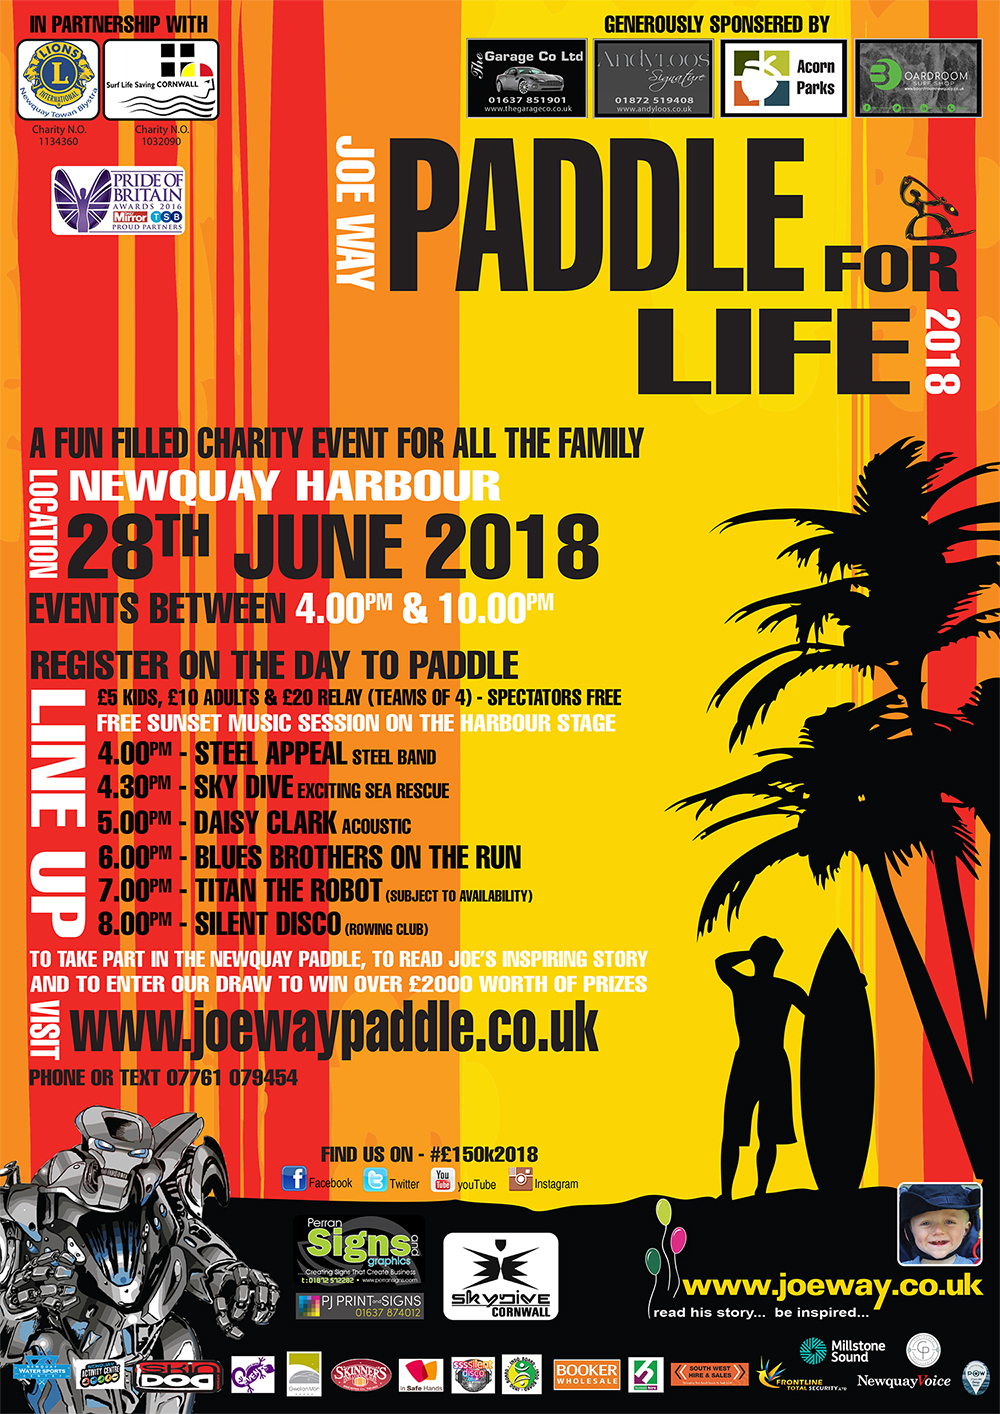 The fun filled event is in memory of Newquay boy Joe who sadly lost his life in 2008